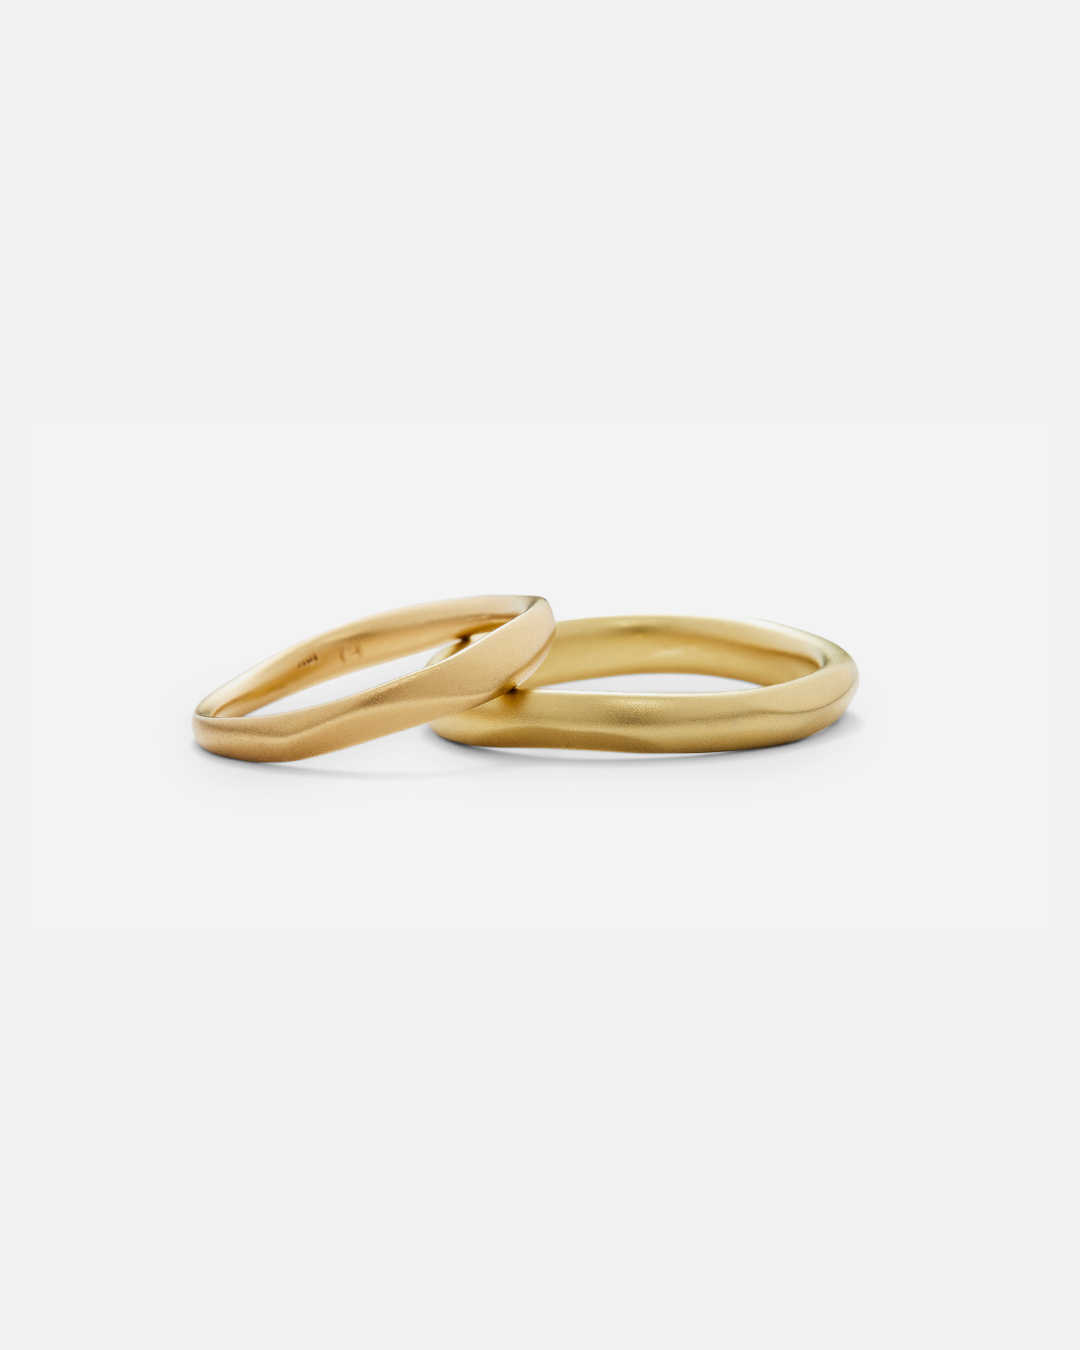 Pebble S / Band By Hiroyo in Wedding Bands Category